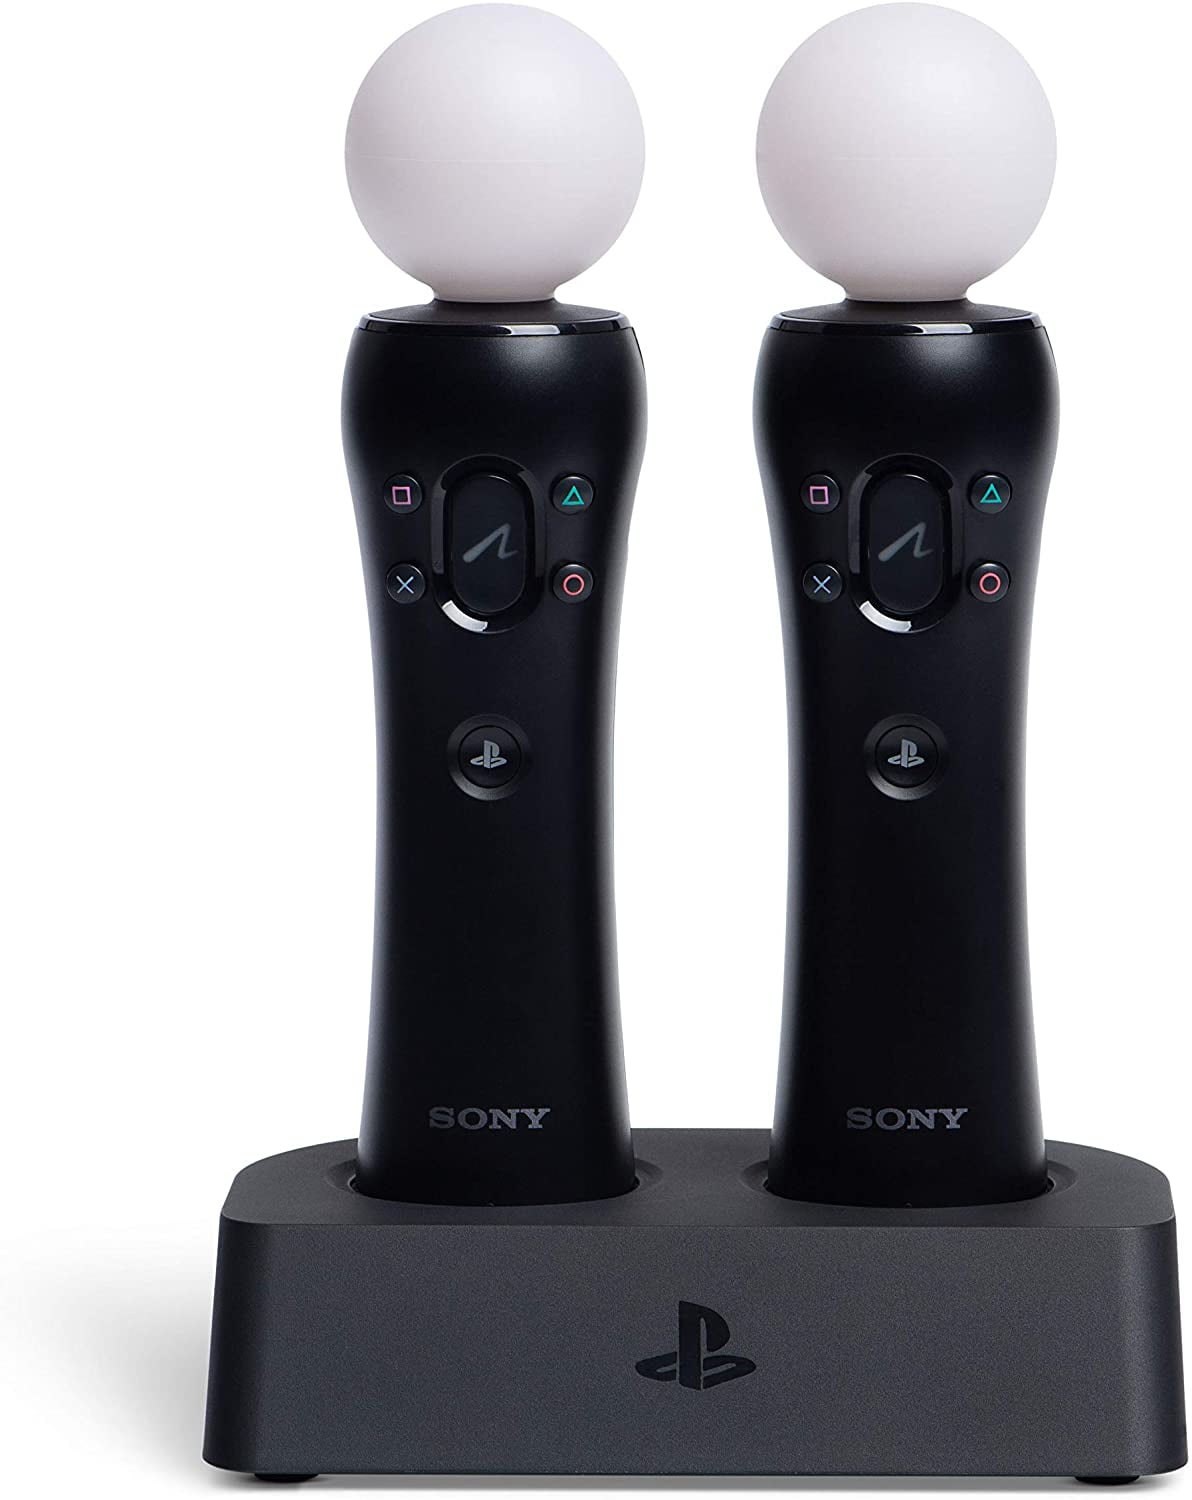 PowerA Charging Dock for PlayStation VR Move Motion Controllers - PSVR - PlayStation 4